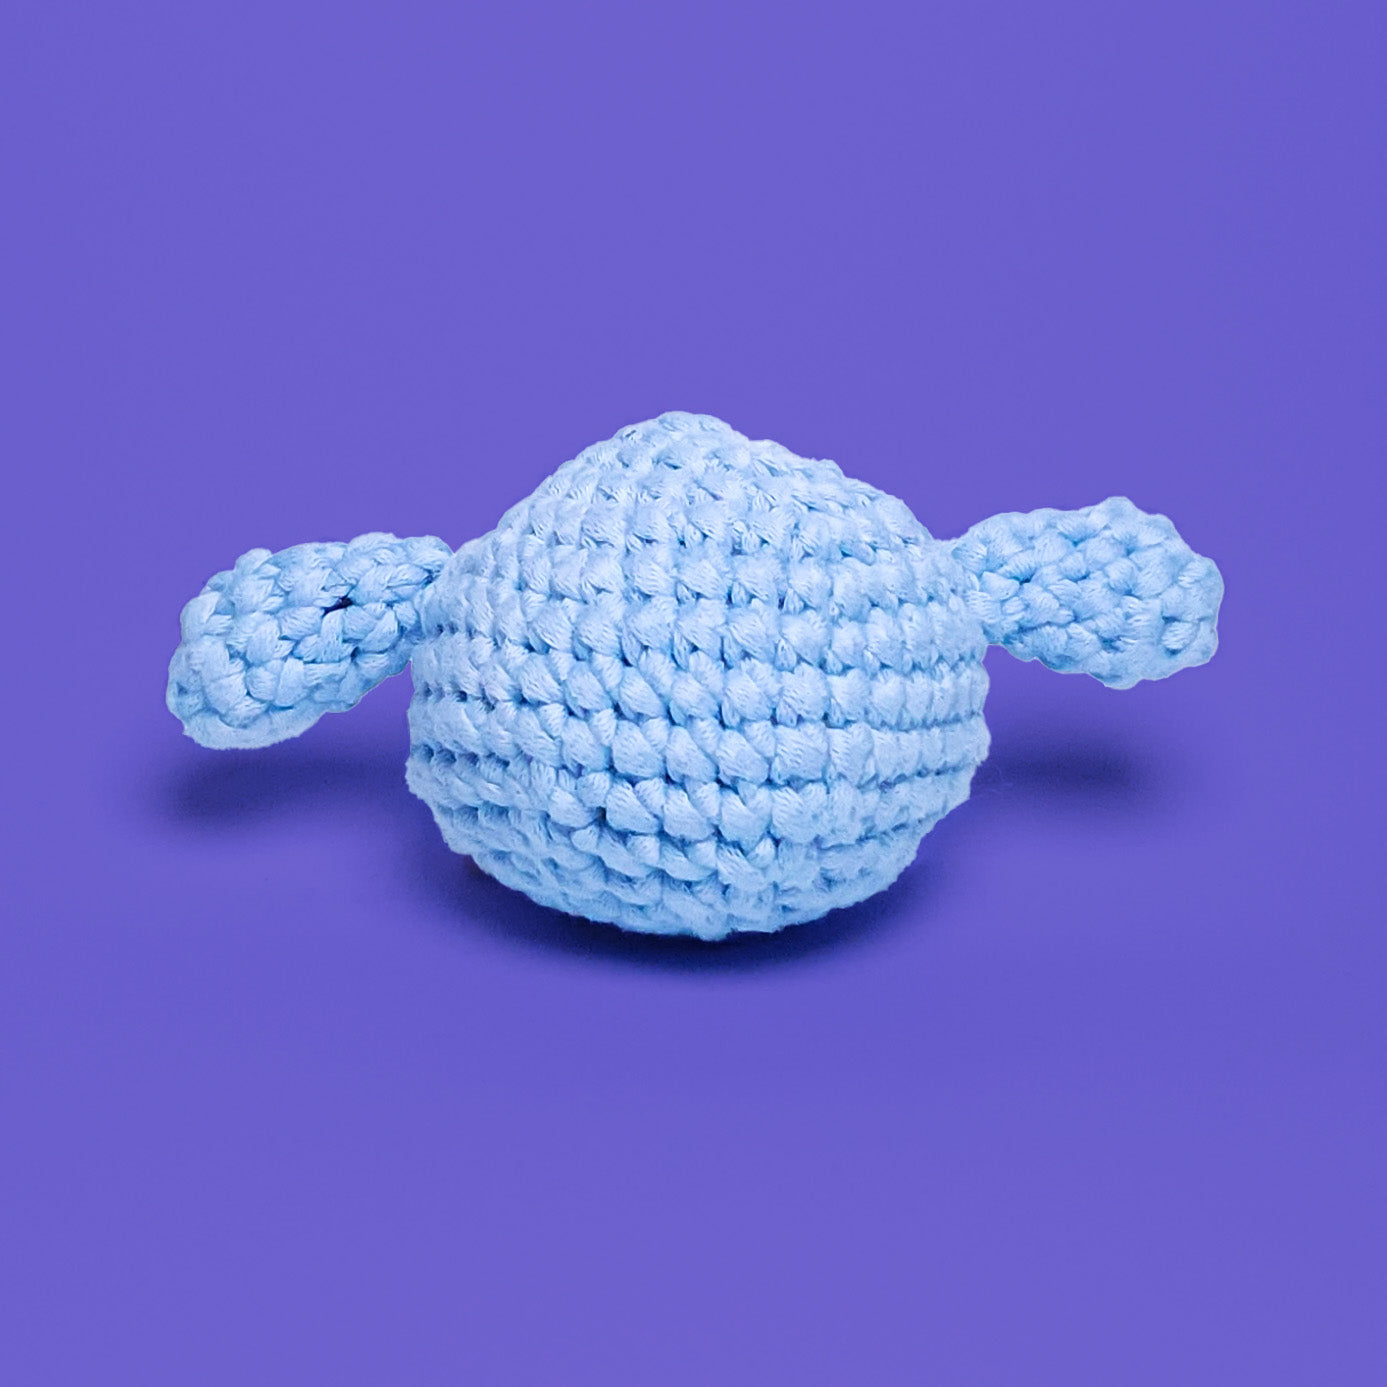 Blue crochet amigurumi elephant head, with long ears at the side. Made from our beginner-friendly crochet kit, ideal for beginners looking to learn crocheting. Back view.